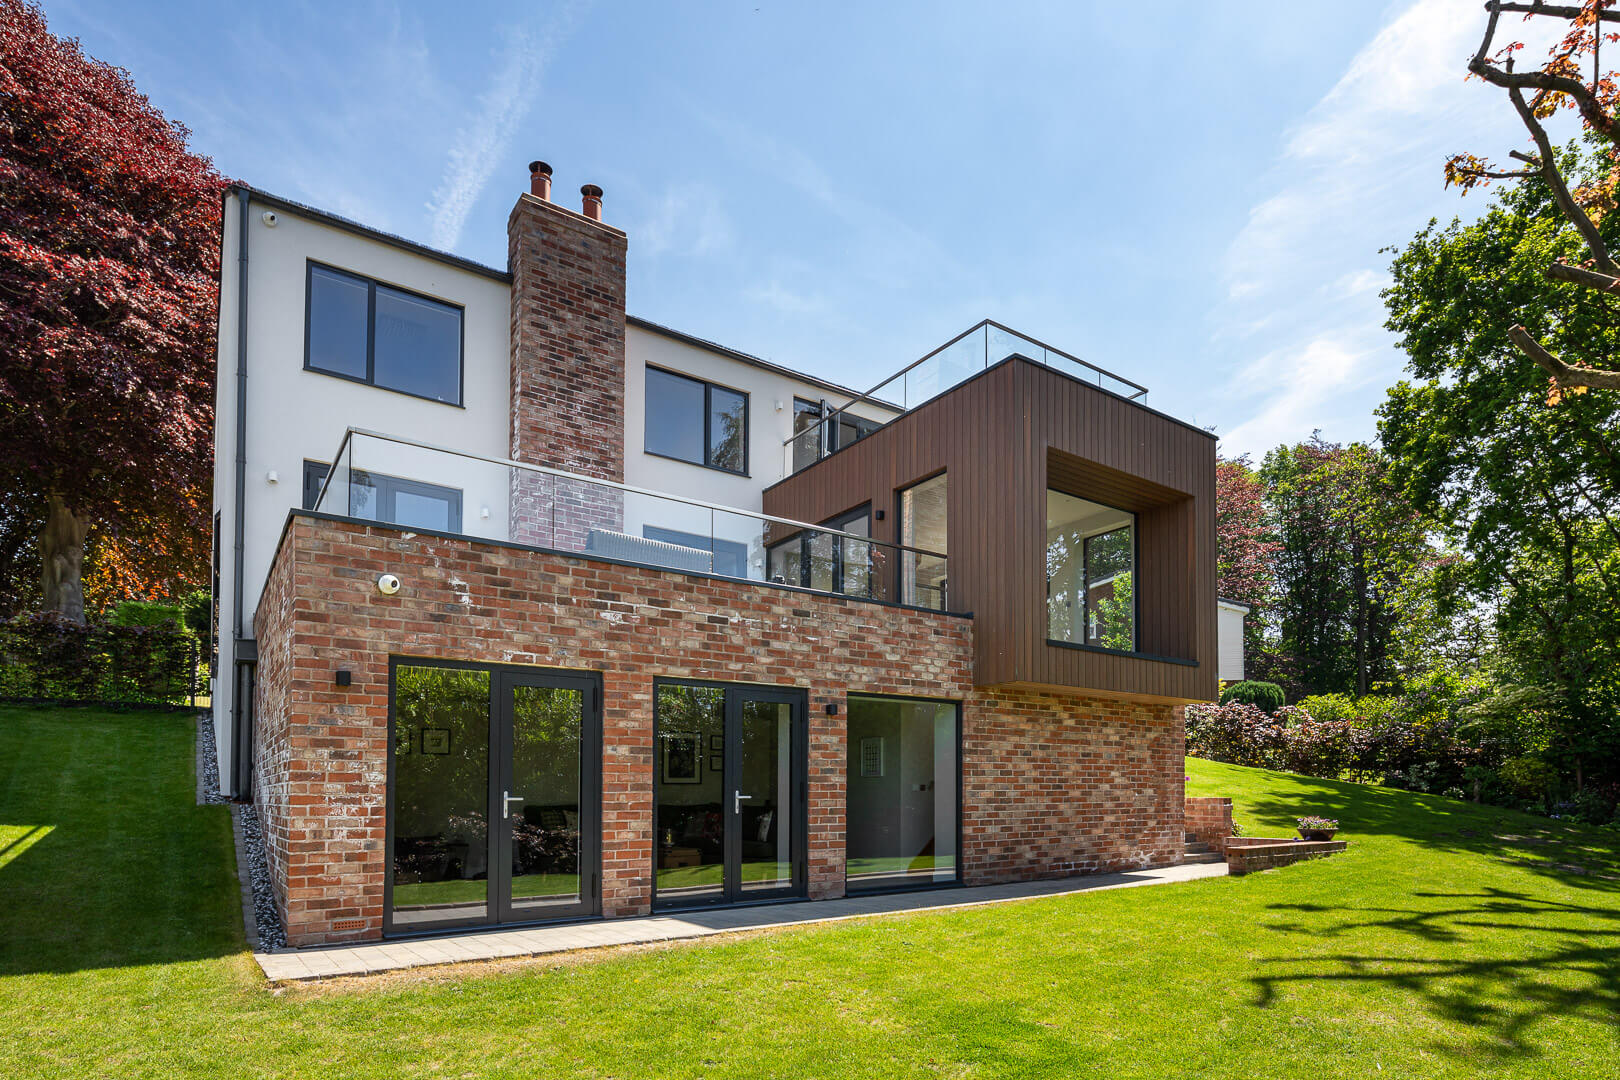 Architectural photography - Refurbishment & extension to a private home, Cheshire